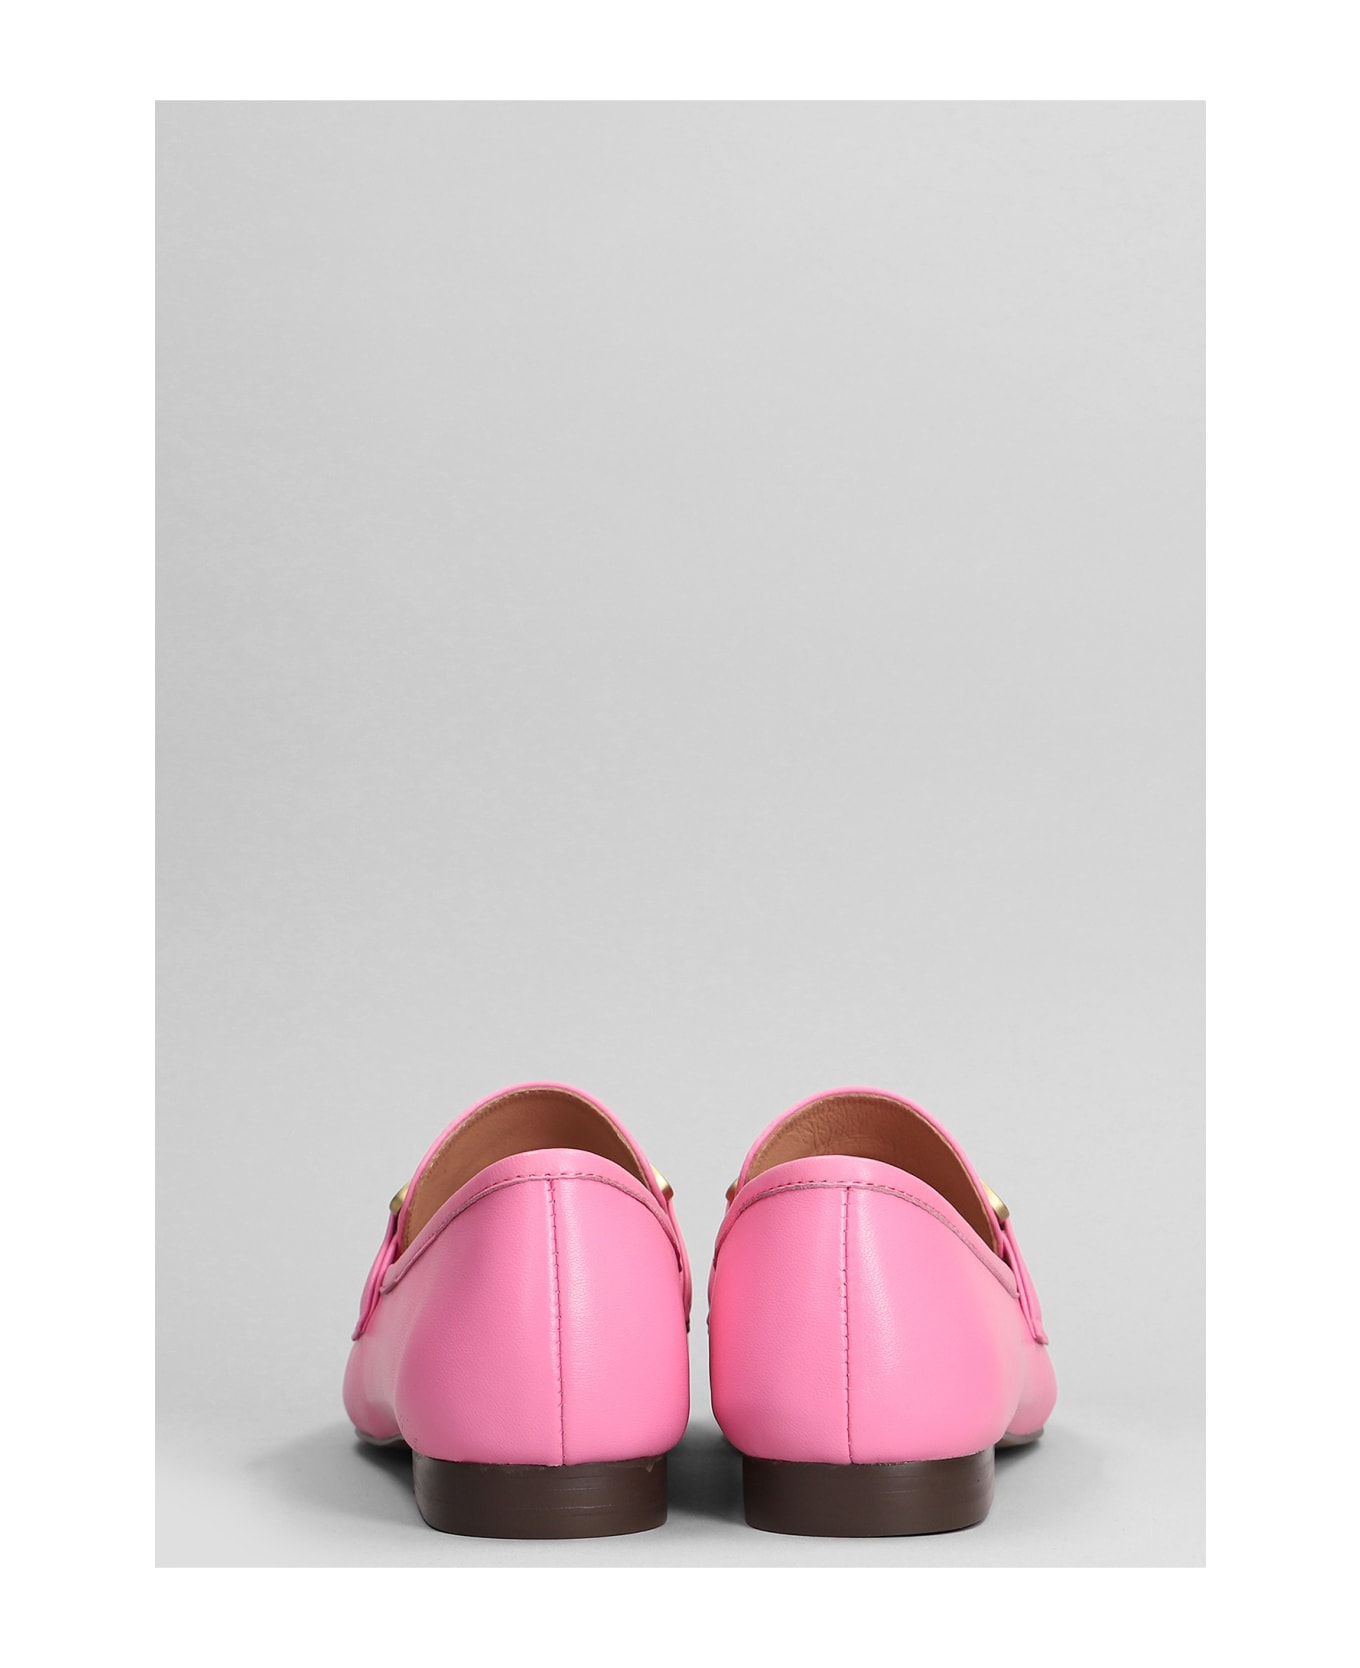 Bibi Lou Zagreb Ii Loafers In Rose-pink Leather - rose-pink フラットシューズ